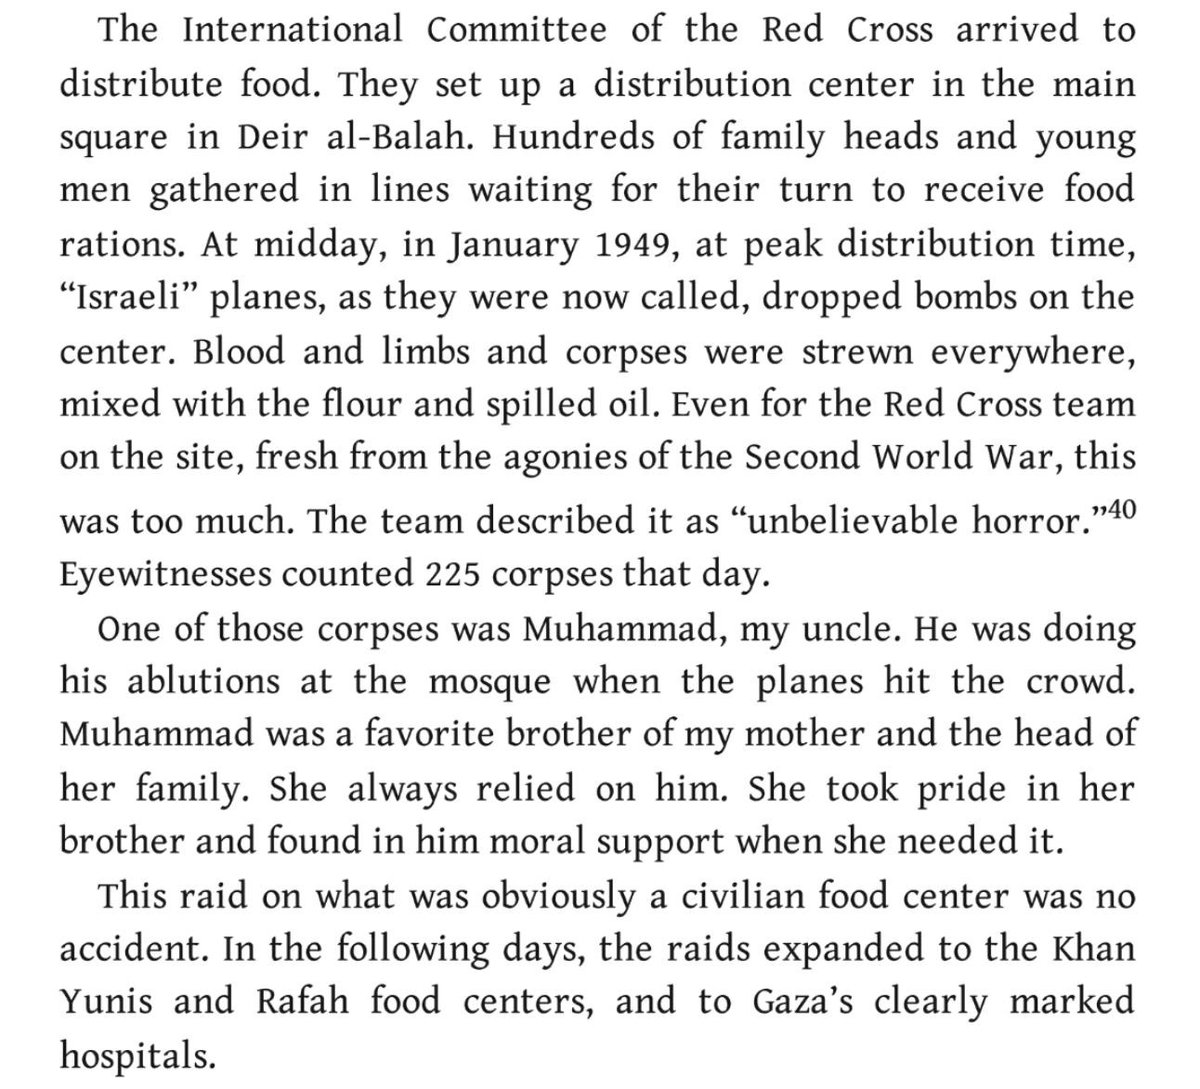 'Blood and limbs and corpses were strewn everywhere, mixed with the flour and spilled oil. Even for the Red Cross team on the site, fresh from the agonies of the Second World War, this was too much. The team described it as 'unbelievable horror.'' No, this is not a description